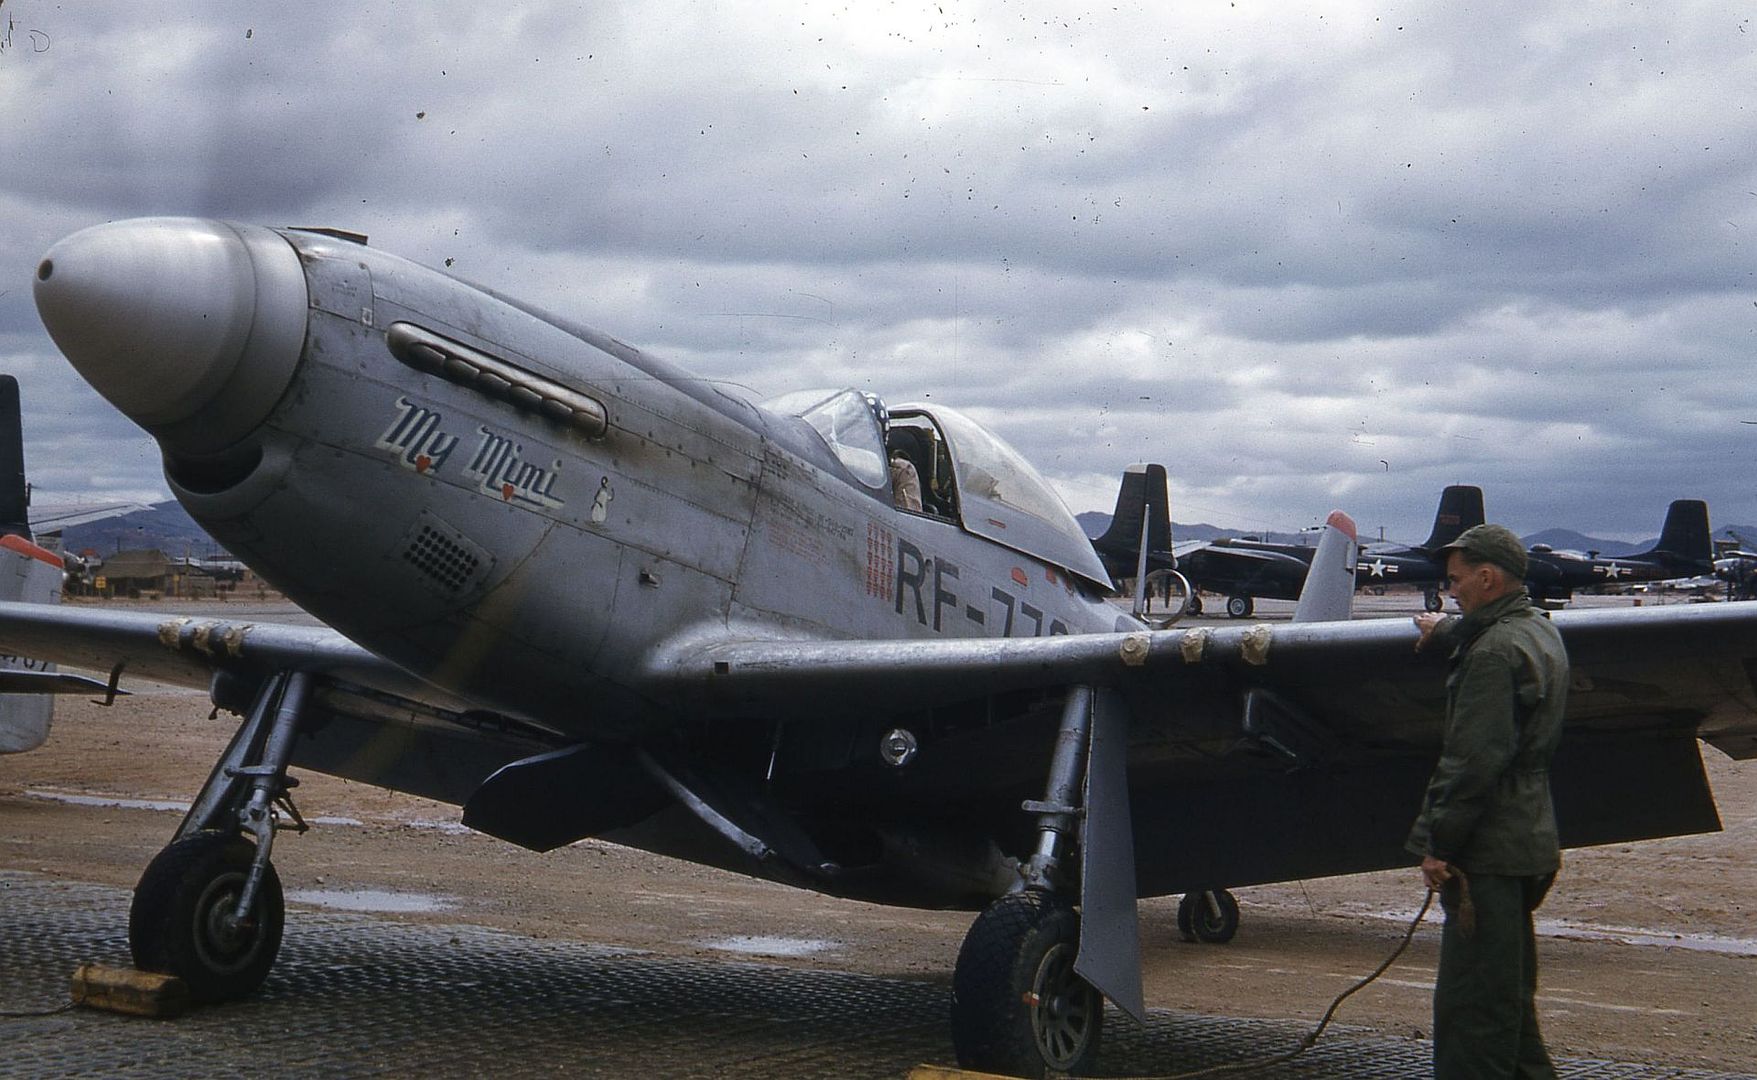 One Half Left Front View Of A North American RF 51D Mustang My Mimi Sn 44 84778 Cn 44634 Parked On The Hardstand Somewhere In Korea